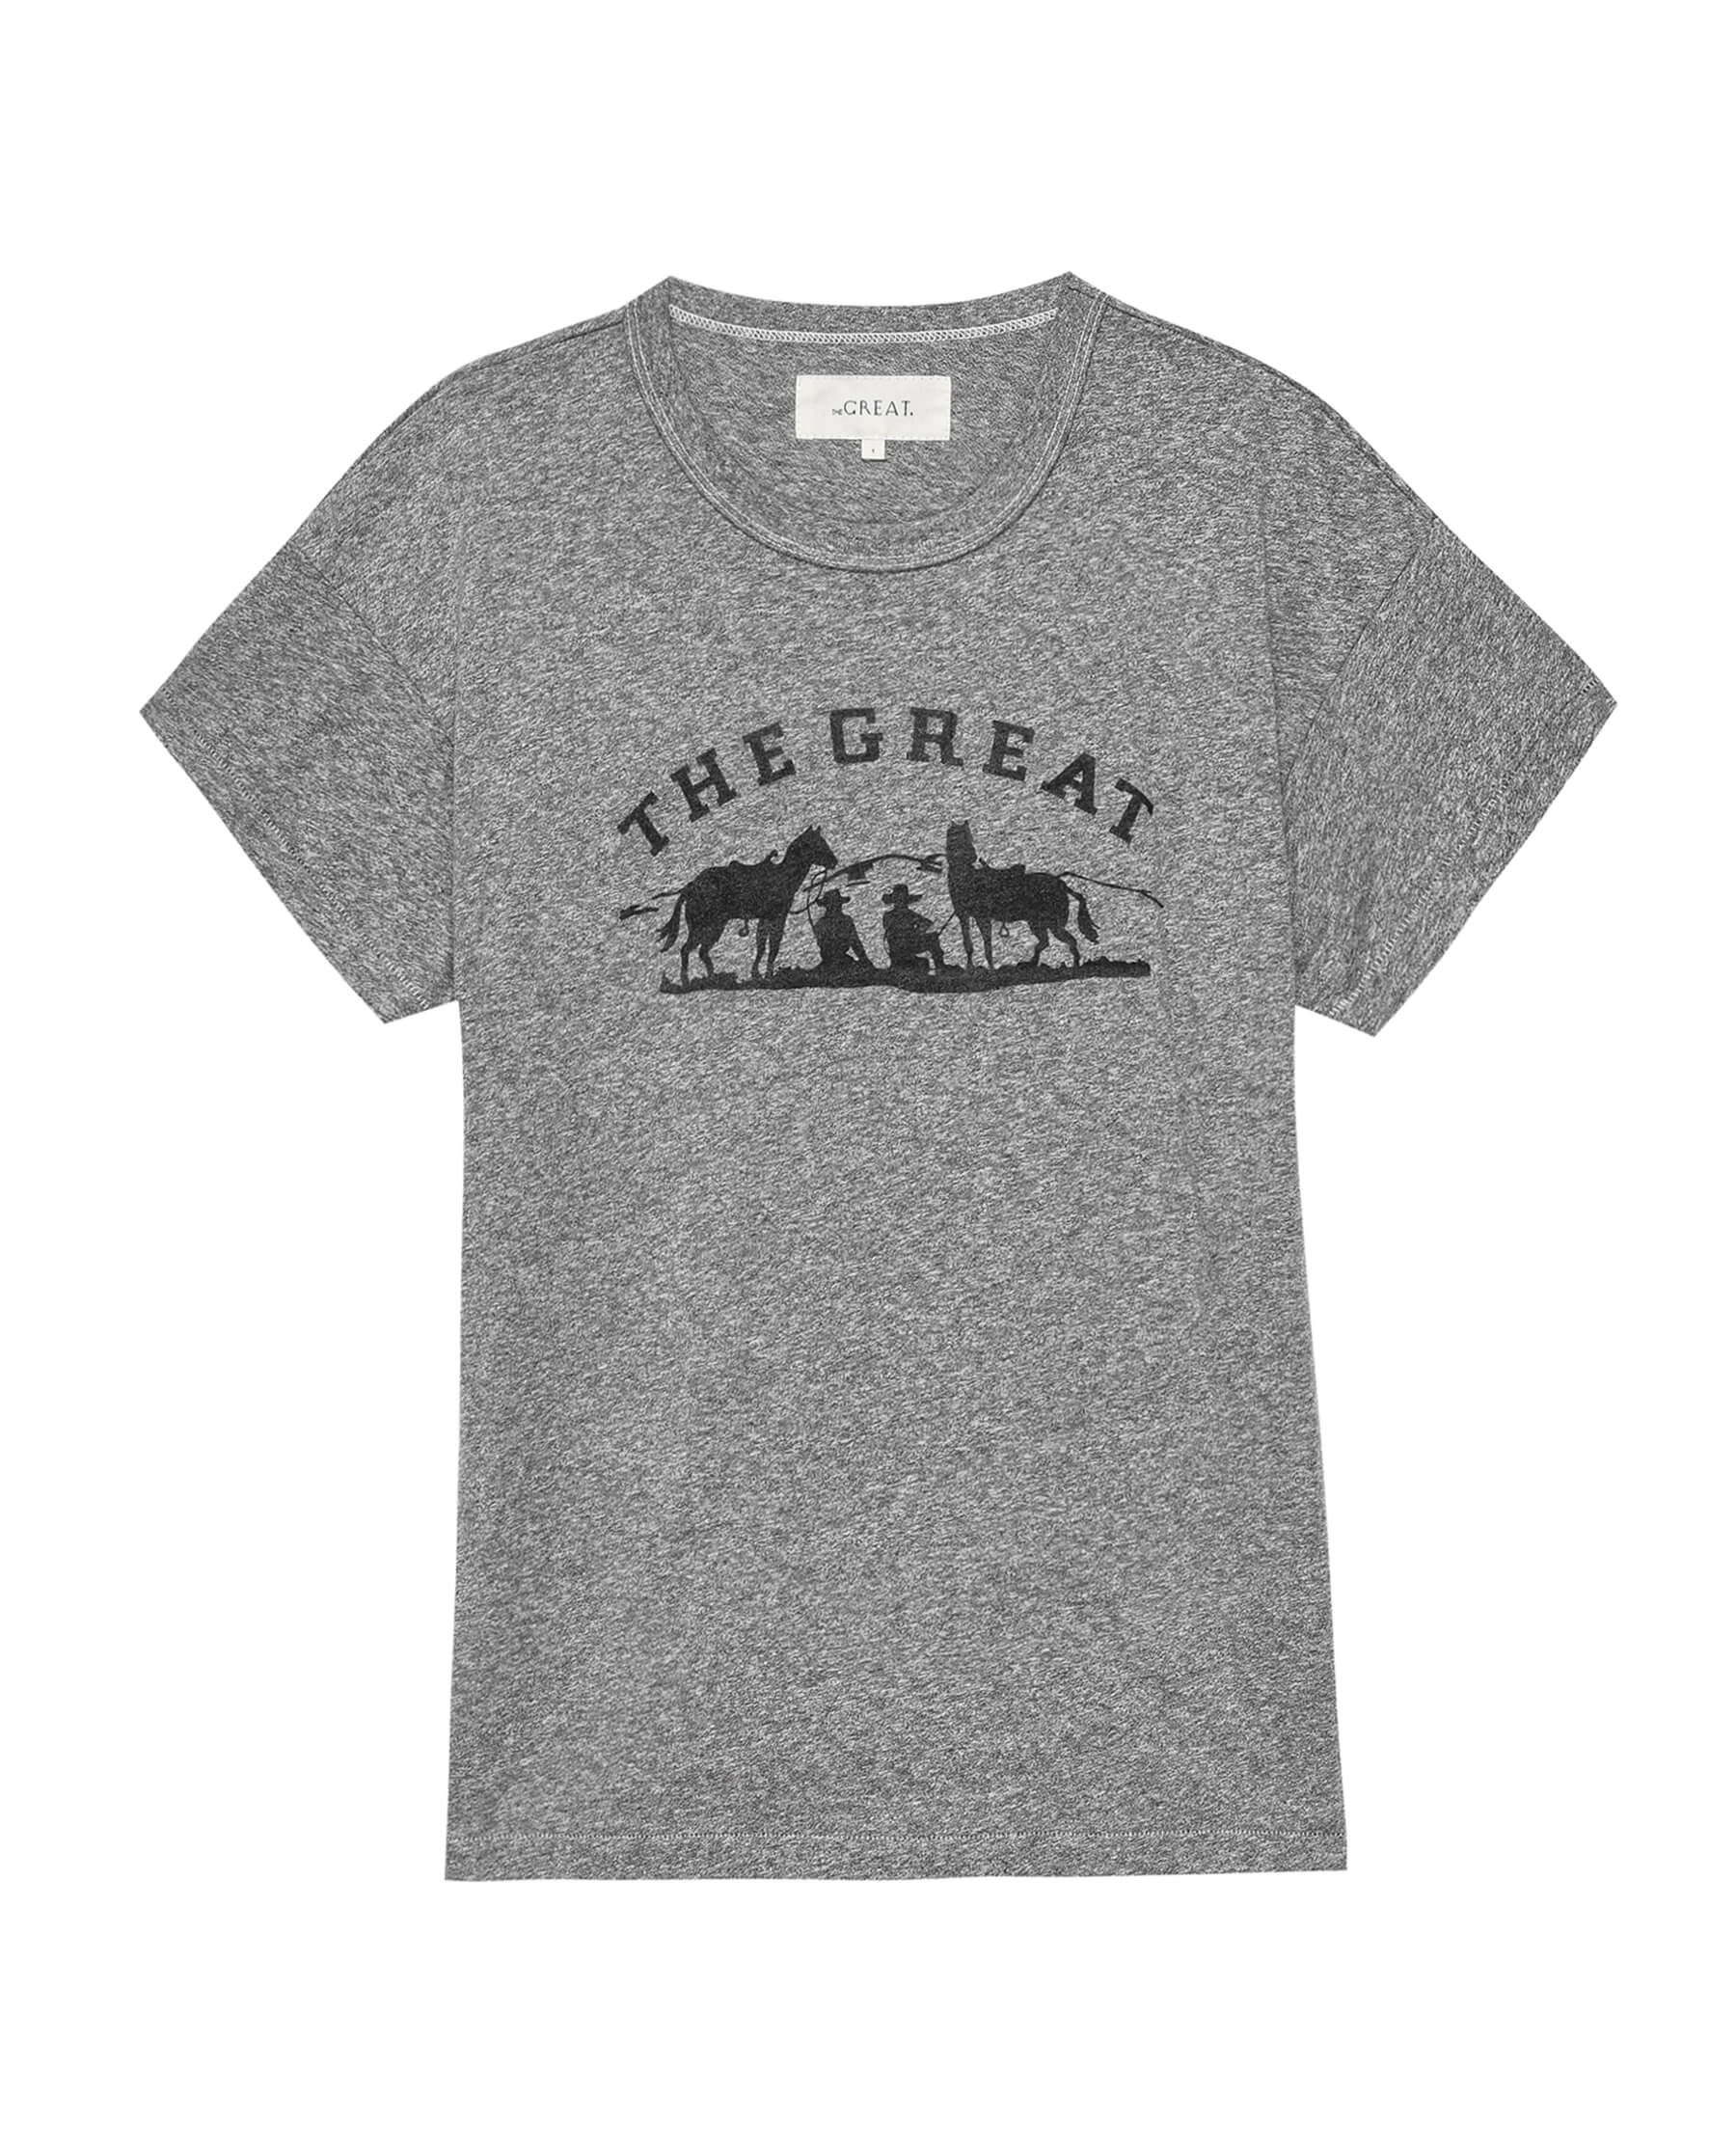 The Boxy Crew. Graphic -- Heather Grey with Gaucho Graphic